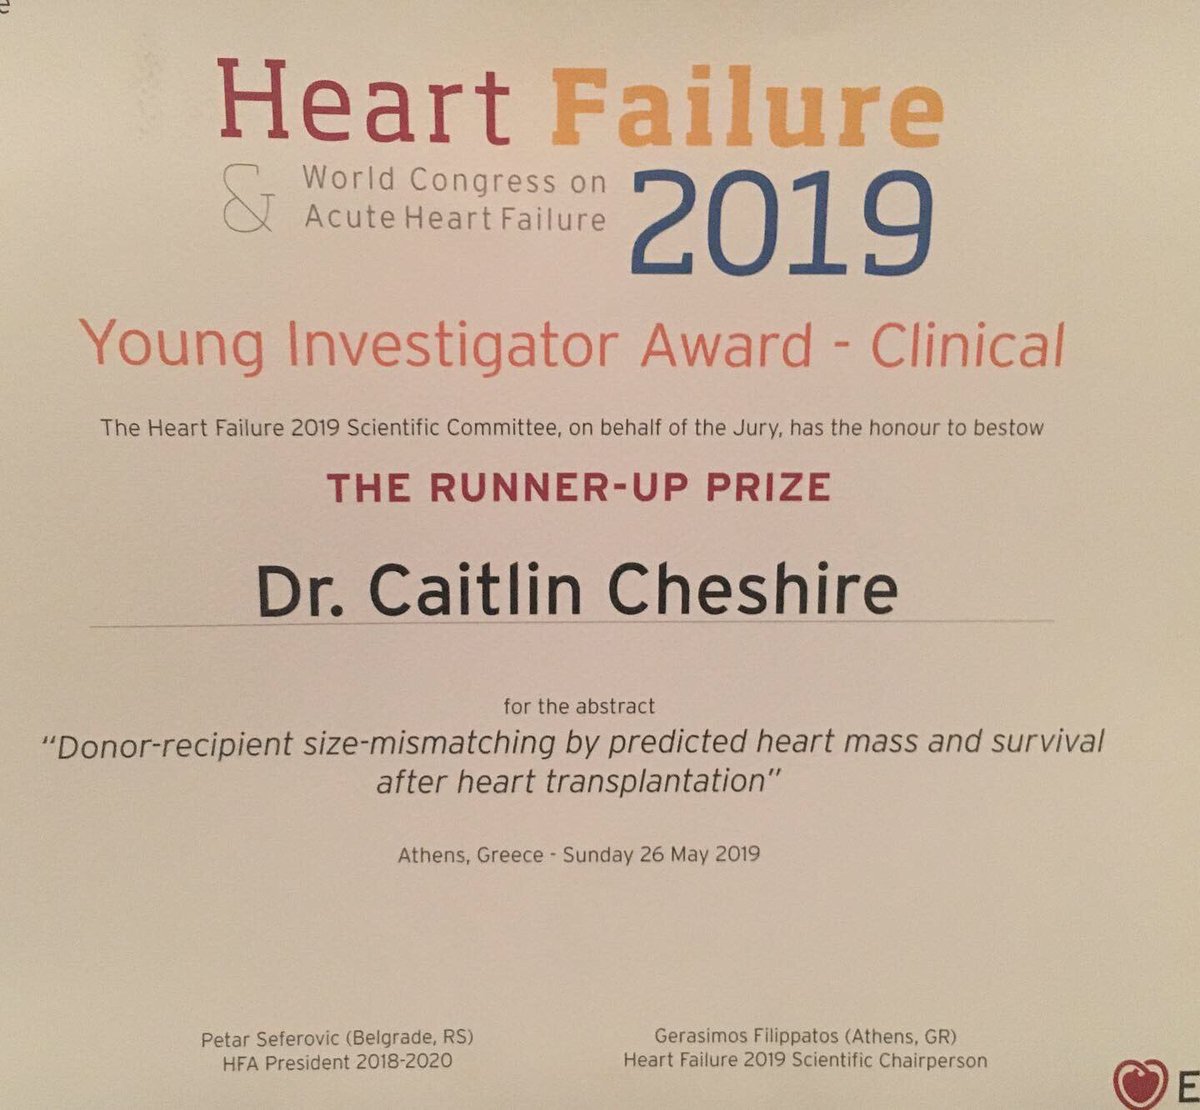 Honoured to have been awarded runner-up in the Young Investigator Award-Clinical at #Heartfailure2019 for our work on size matching by predicted heart mass in heart transplant. Many thanks to senior author @drstephenpettit for the ongoing guidance & support.